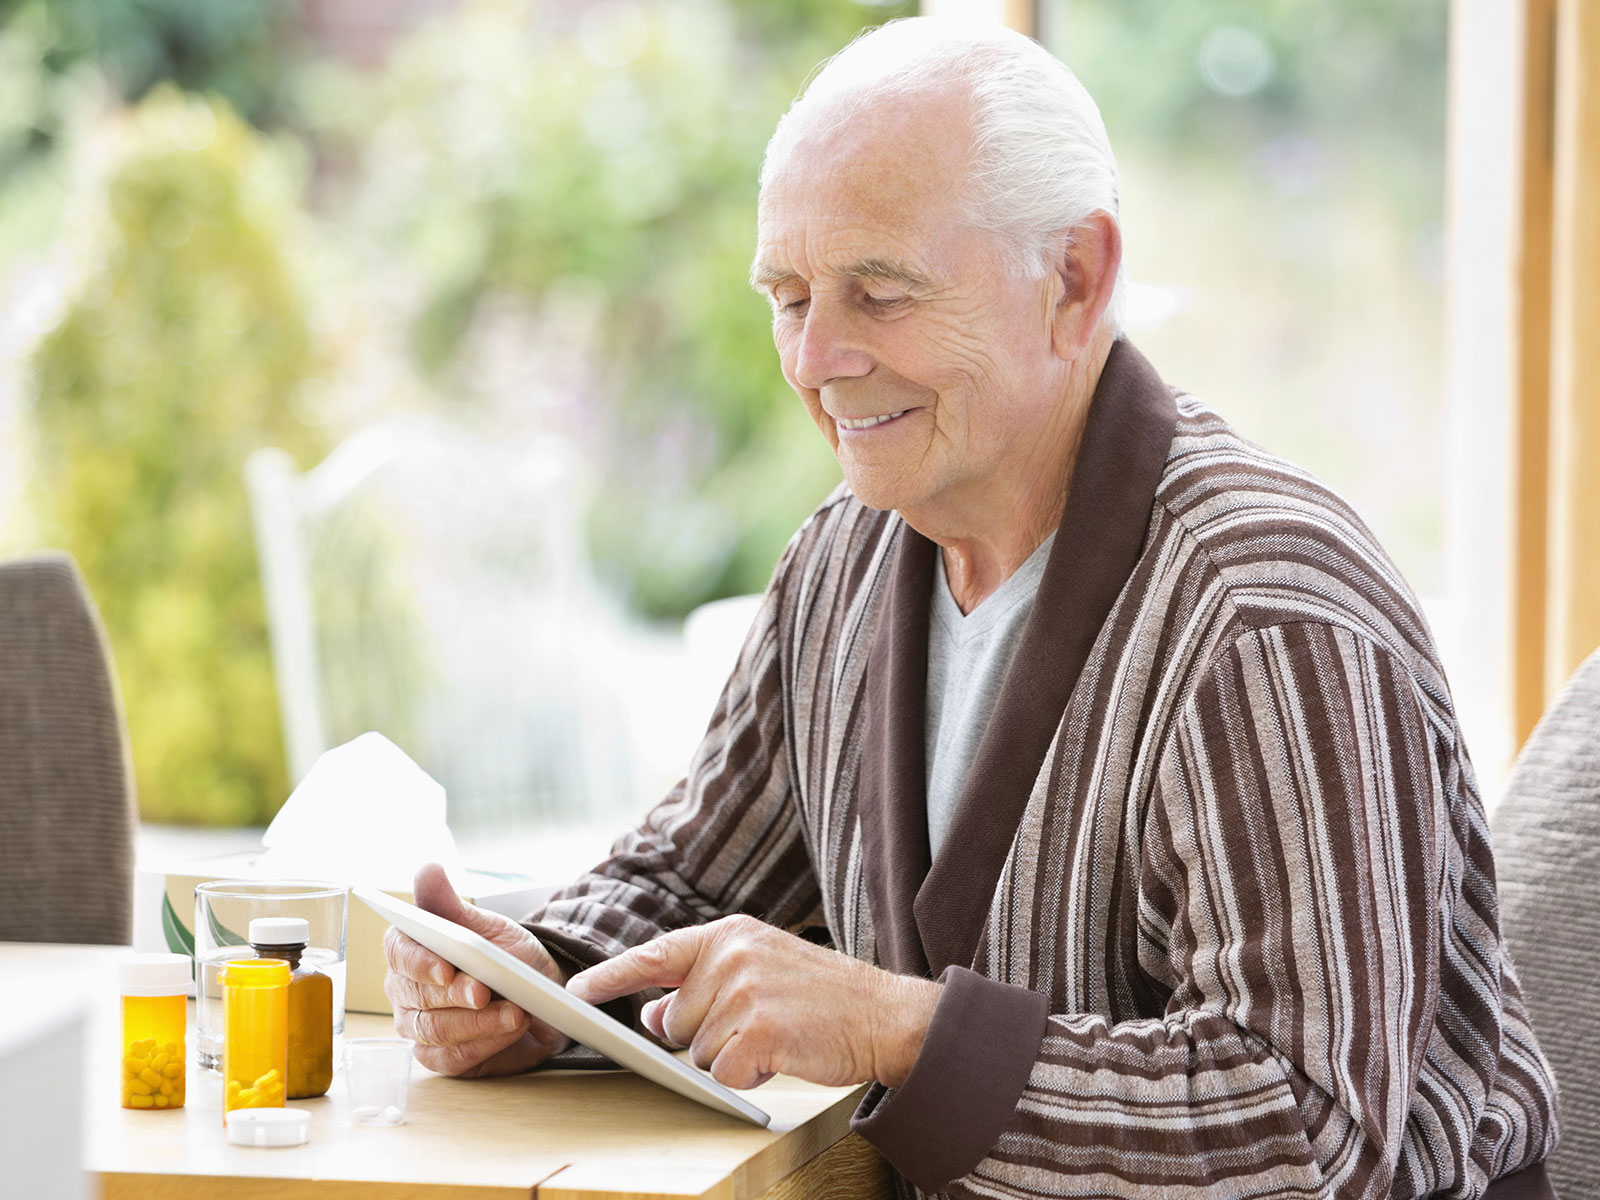 Man sitting at dining table reviewing his prescriptions and prescription documents in front of him